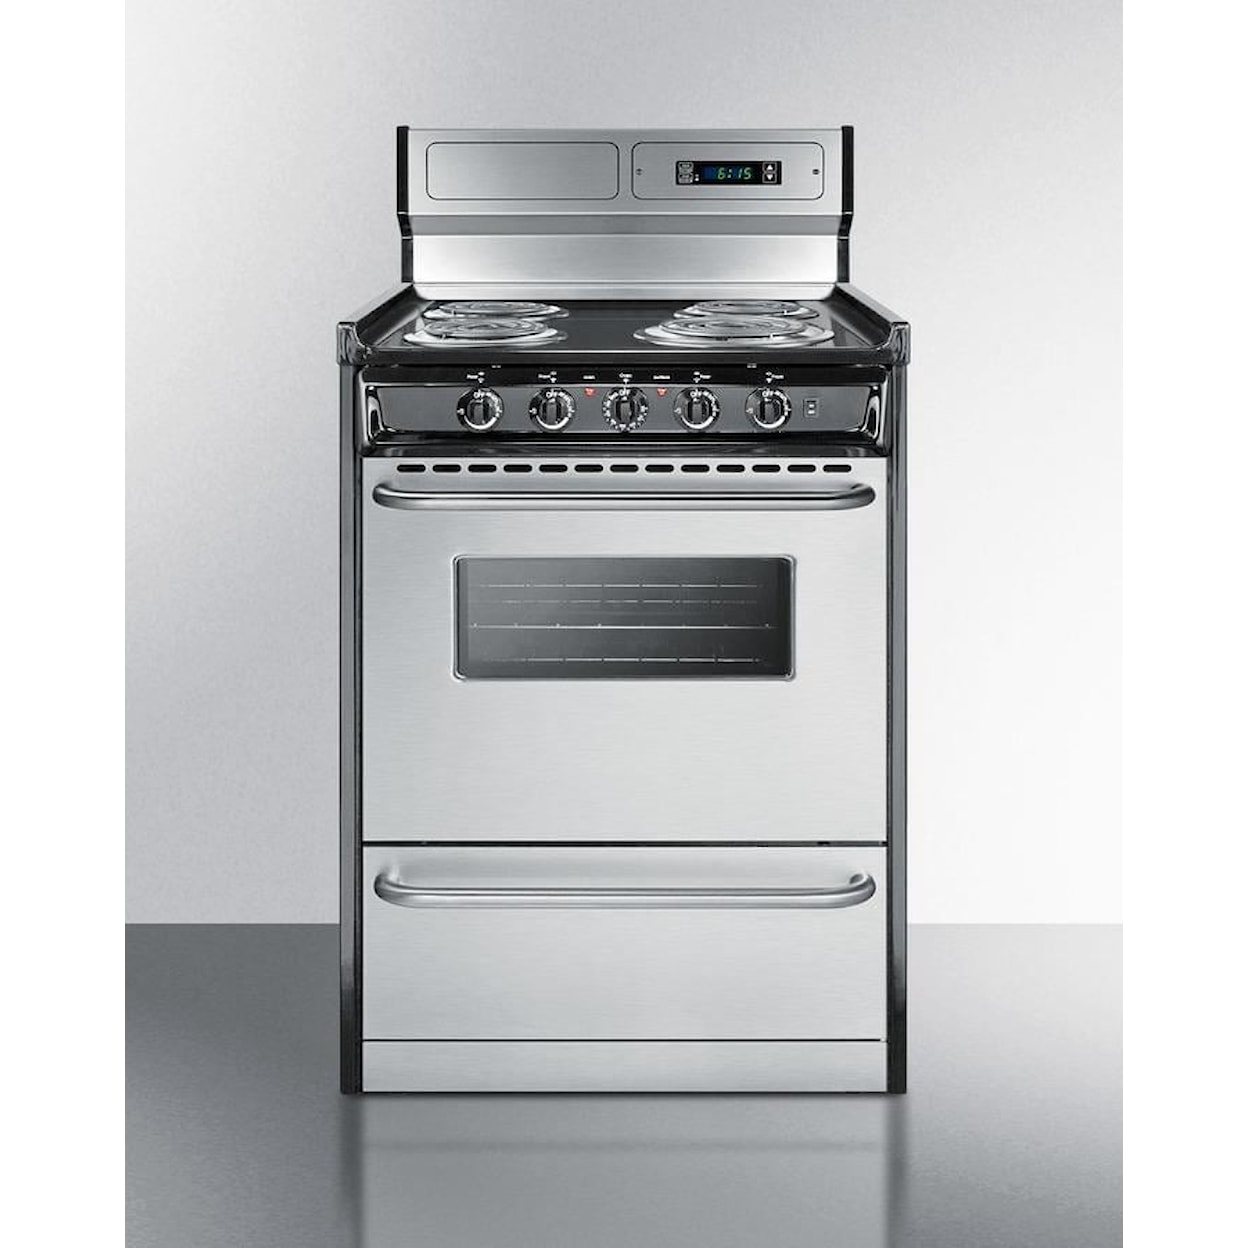 Summit Electric Ranges 24" Freestanding Coil Electric Range